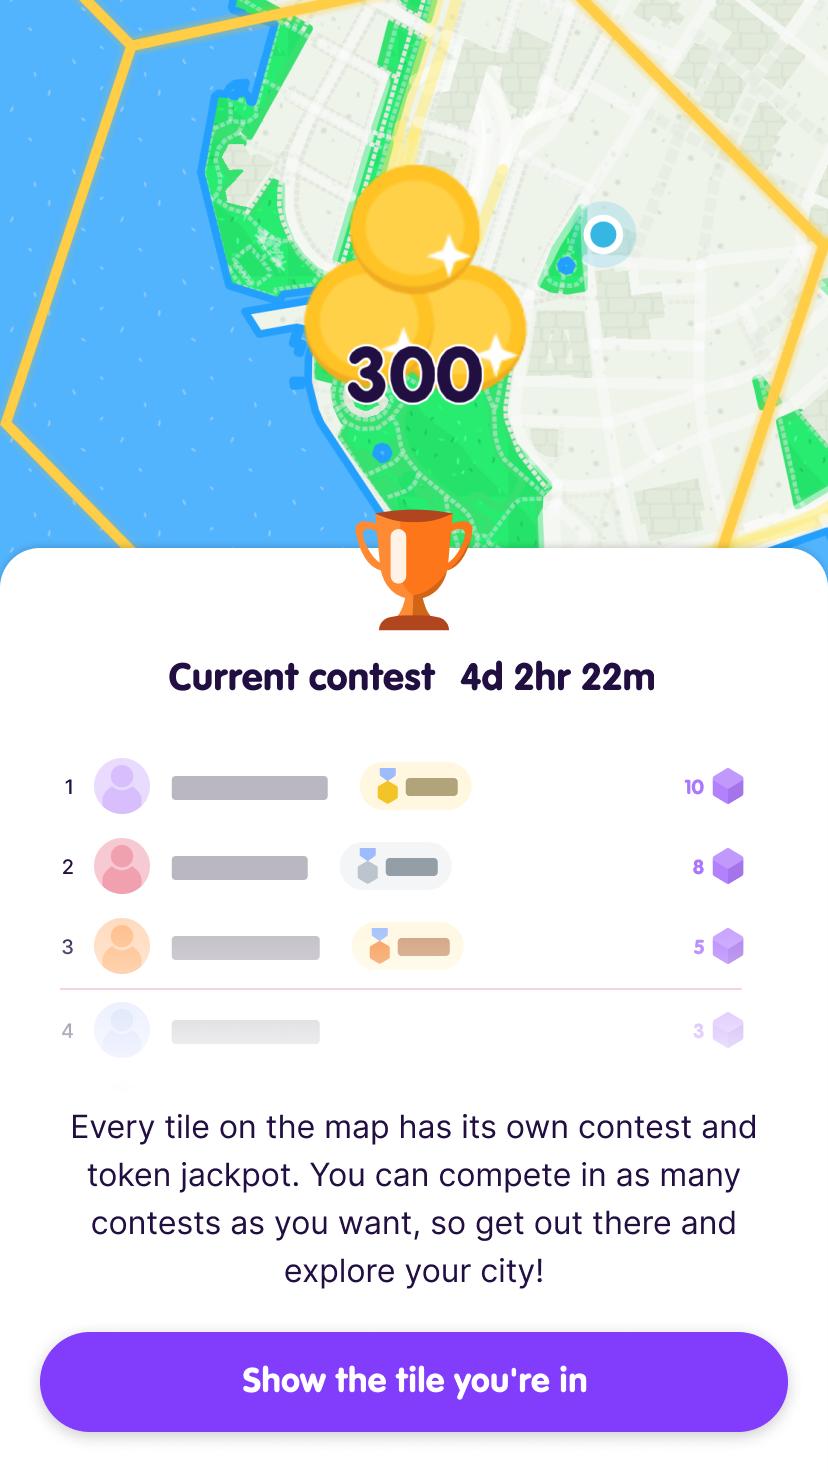 Screenshot from the app intro showing a stylized leaderboard. The map has zoomed to the user's local tile to show the available award amount. There's a button prompting the user to Show the tile they're in.